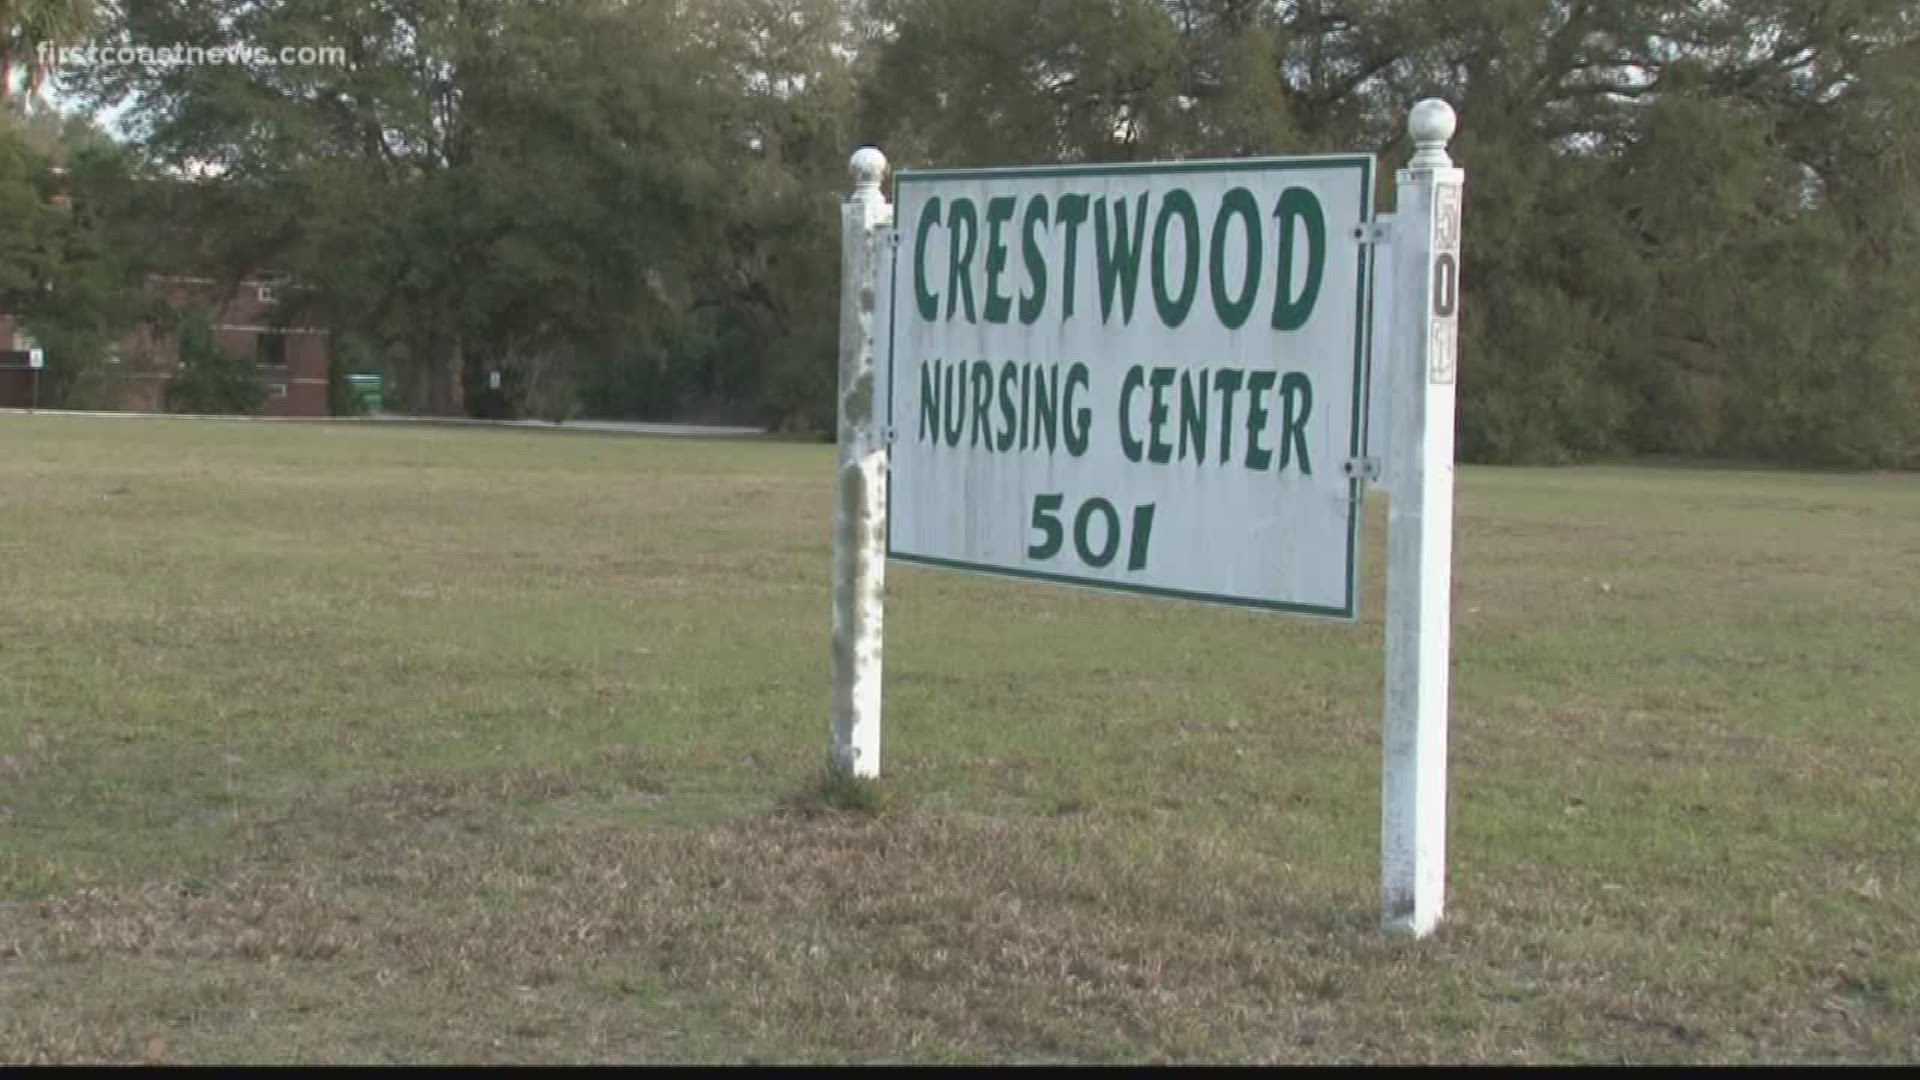 The Crestwood Nursing Center has until June 30th to sell or Florida's Agency For Health Care Administration will require it to relocate its residents.